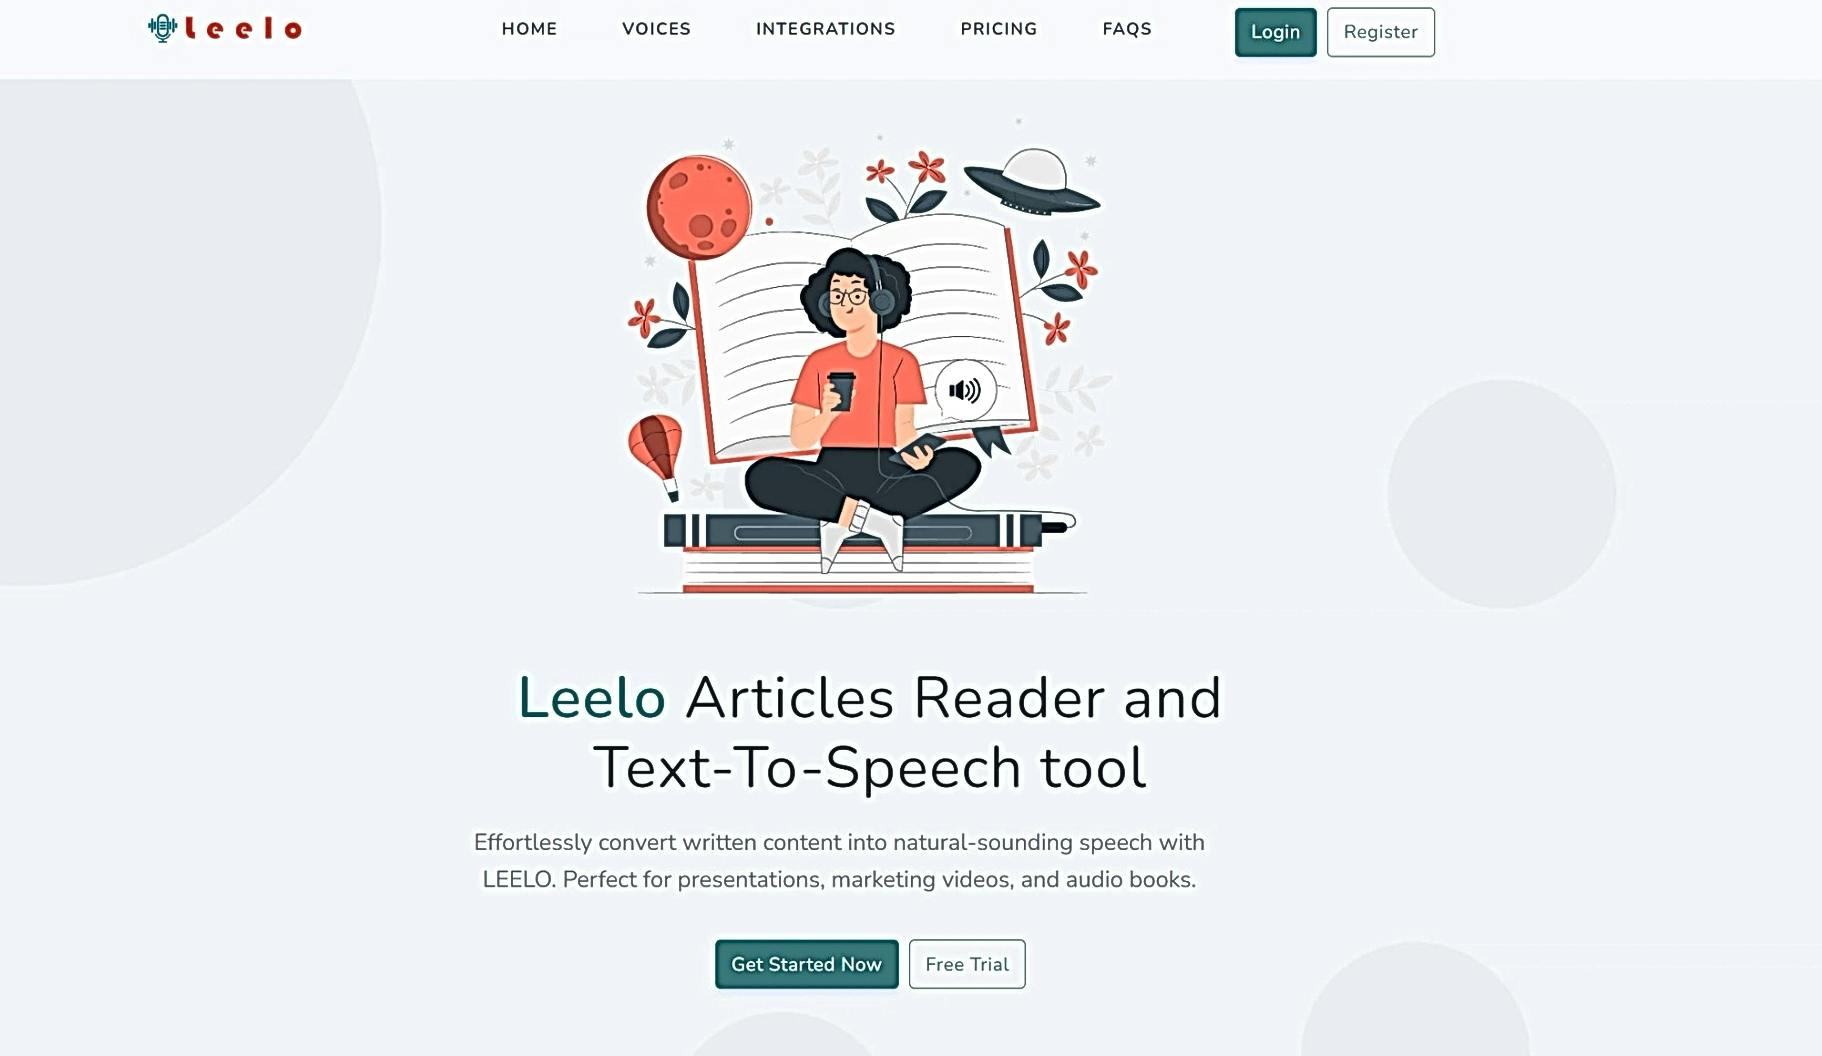 Leelo featured